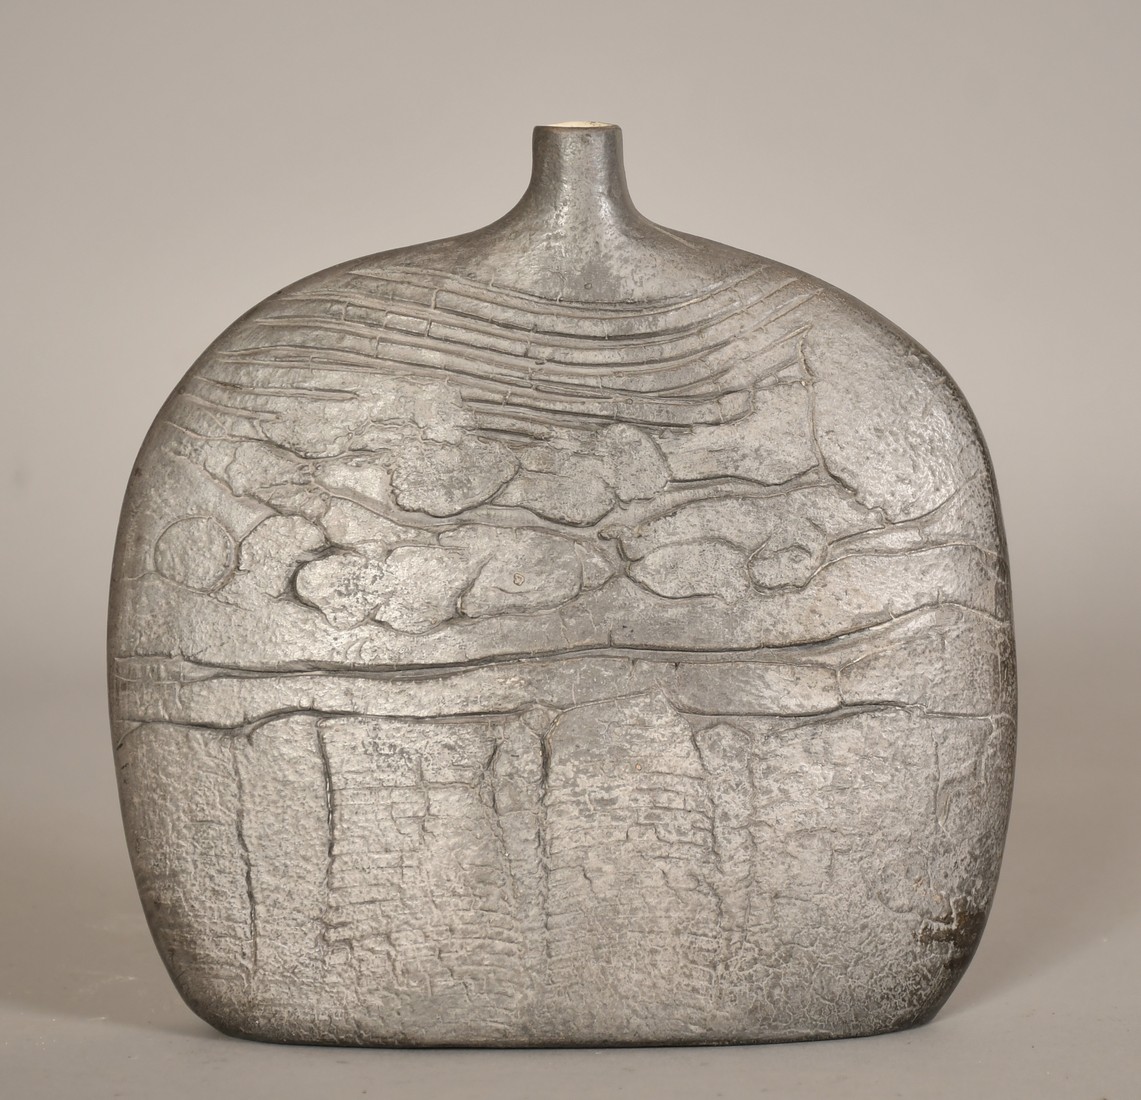 A studio pottery flattened vase with a textured metallic style finish, 7" (18cm) high. - Image 4 of 4